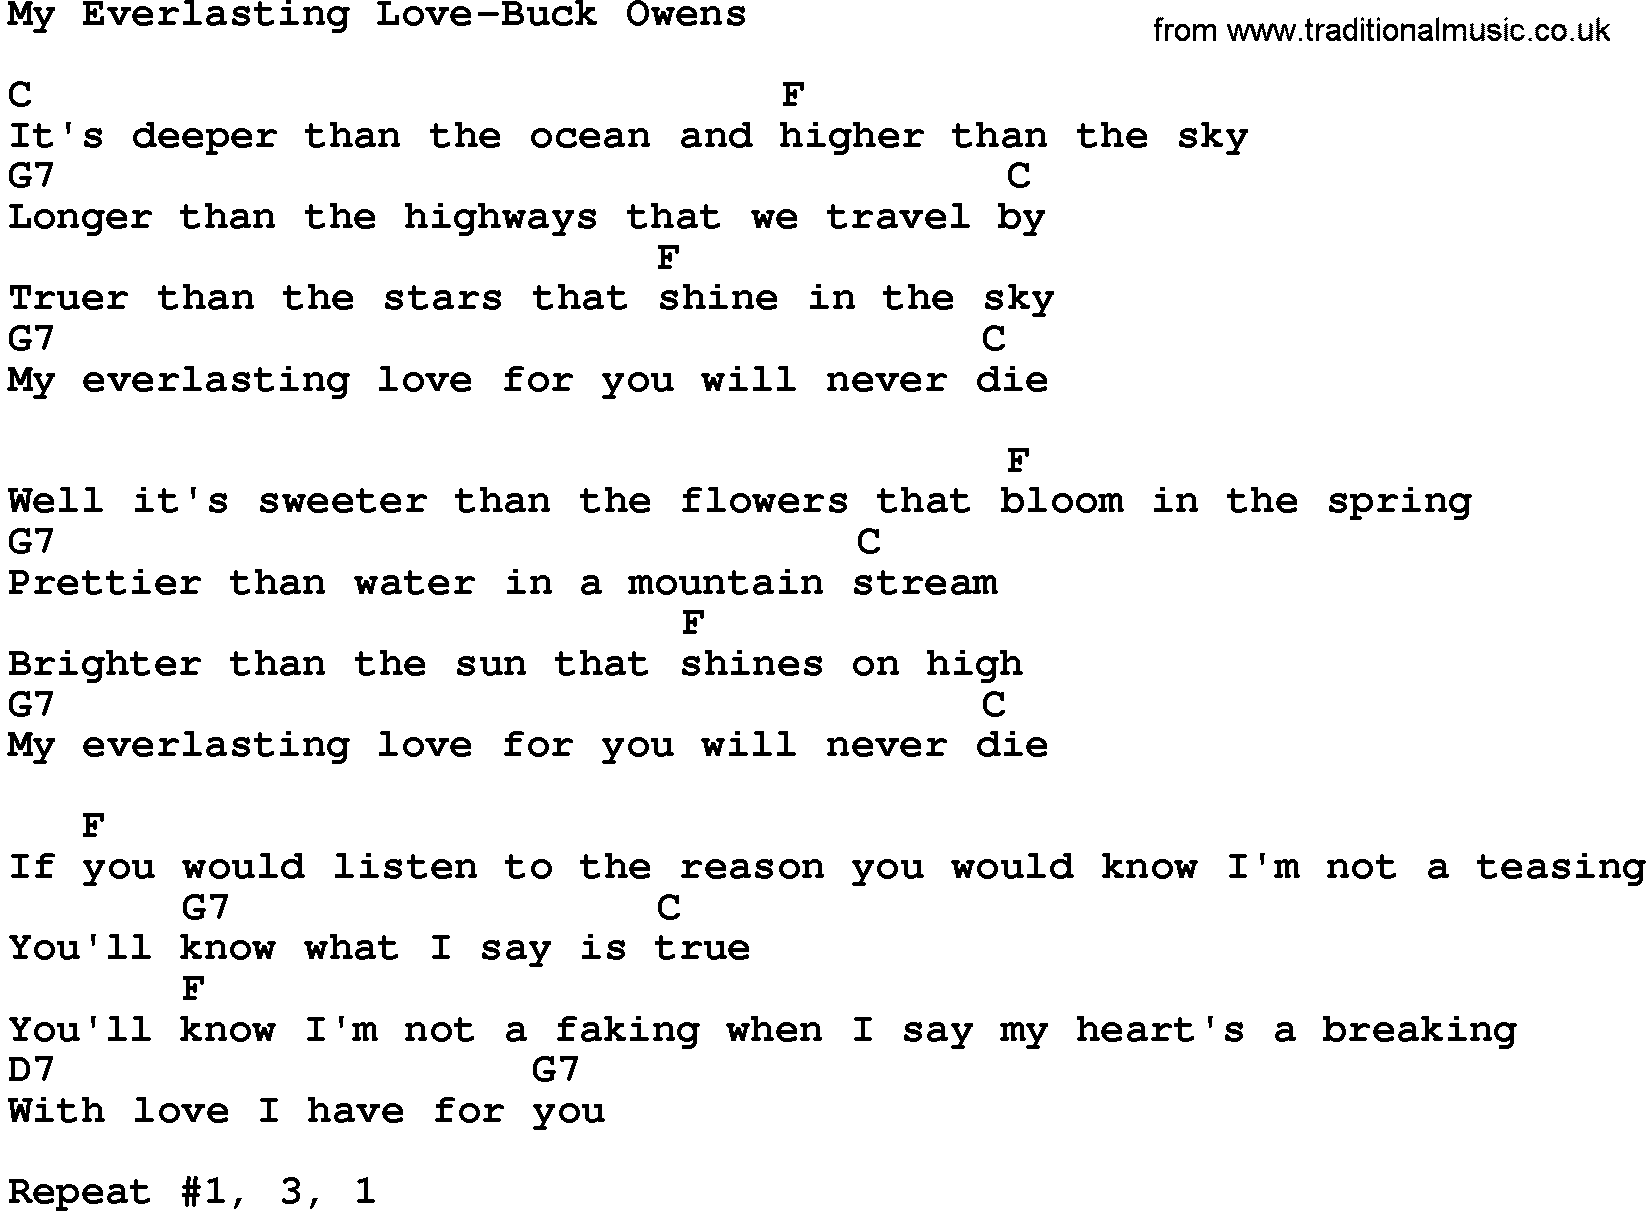 Country music song: My Everlasting Love-Buck Owens lyrics and chords